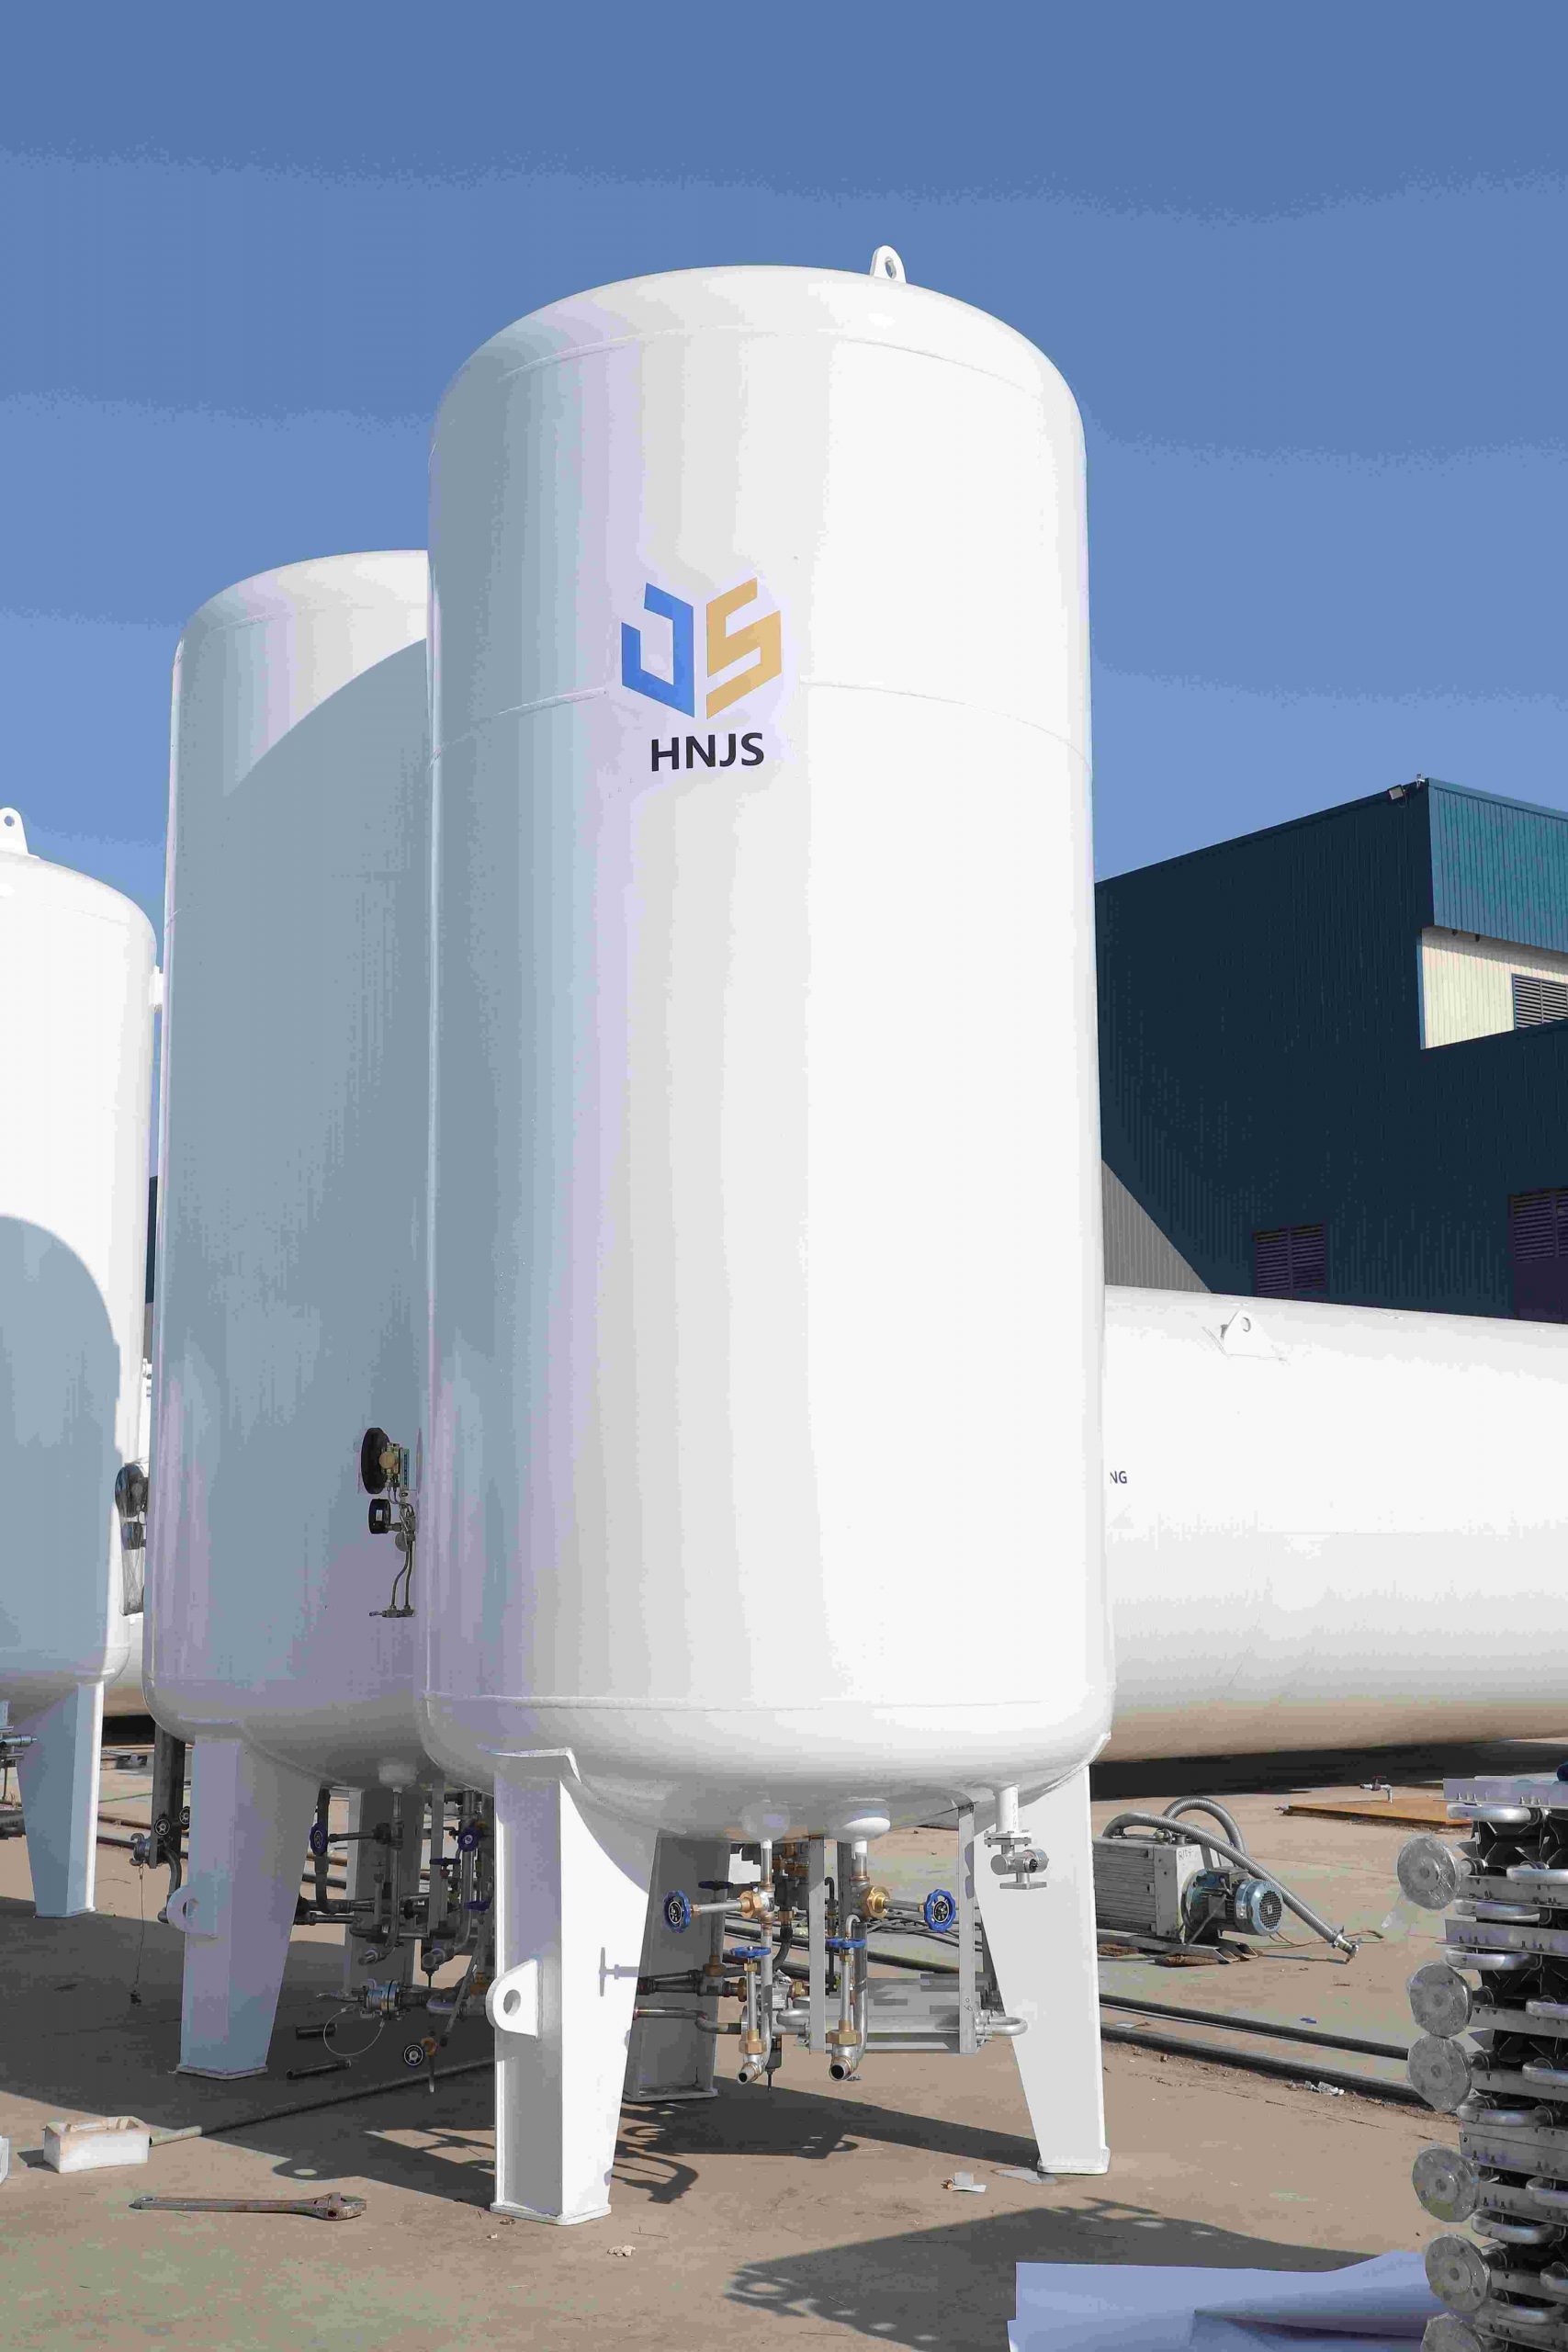 The thermal insulation performance of station cryogenic storage tanks and cryogenic liquid pumps should be better